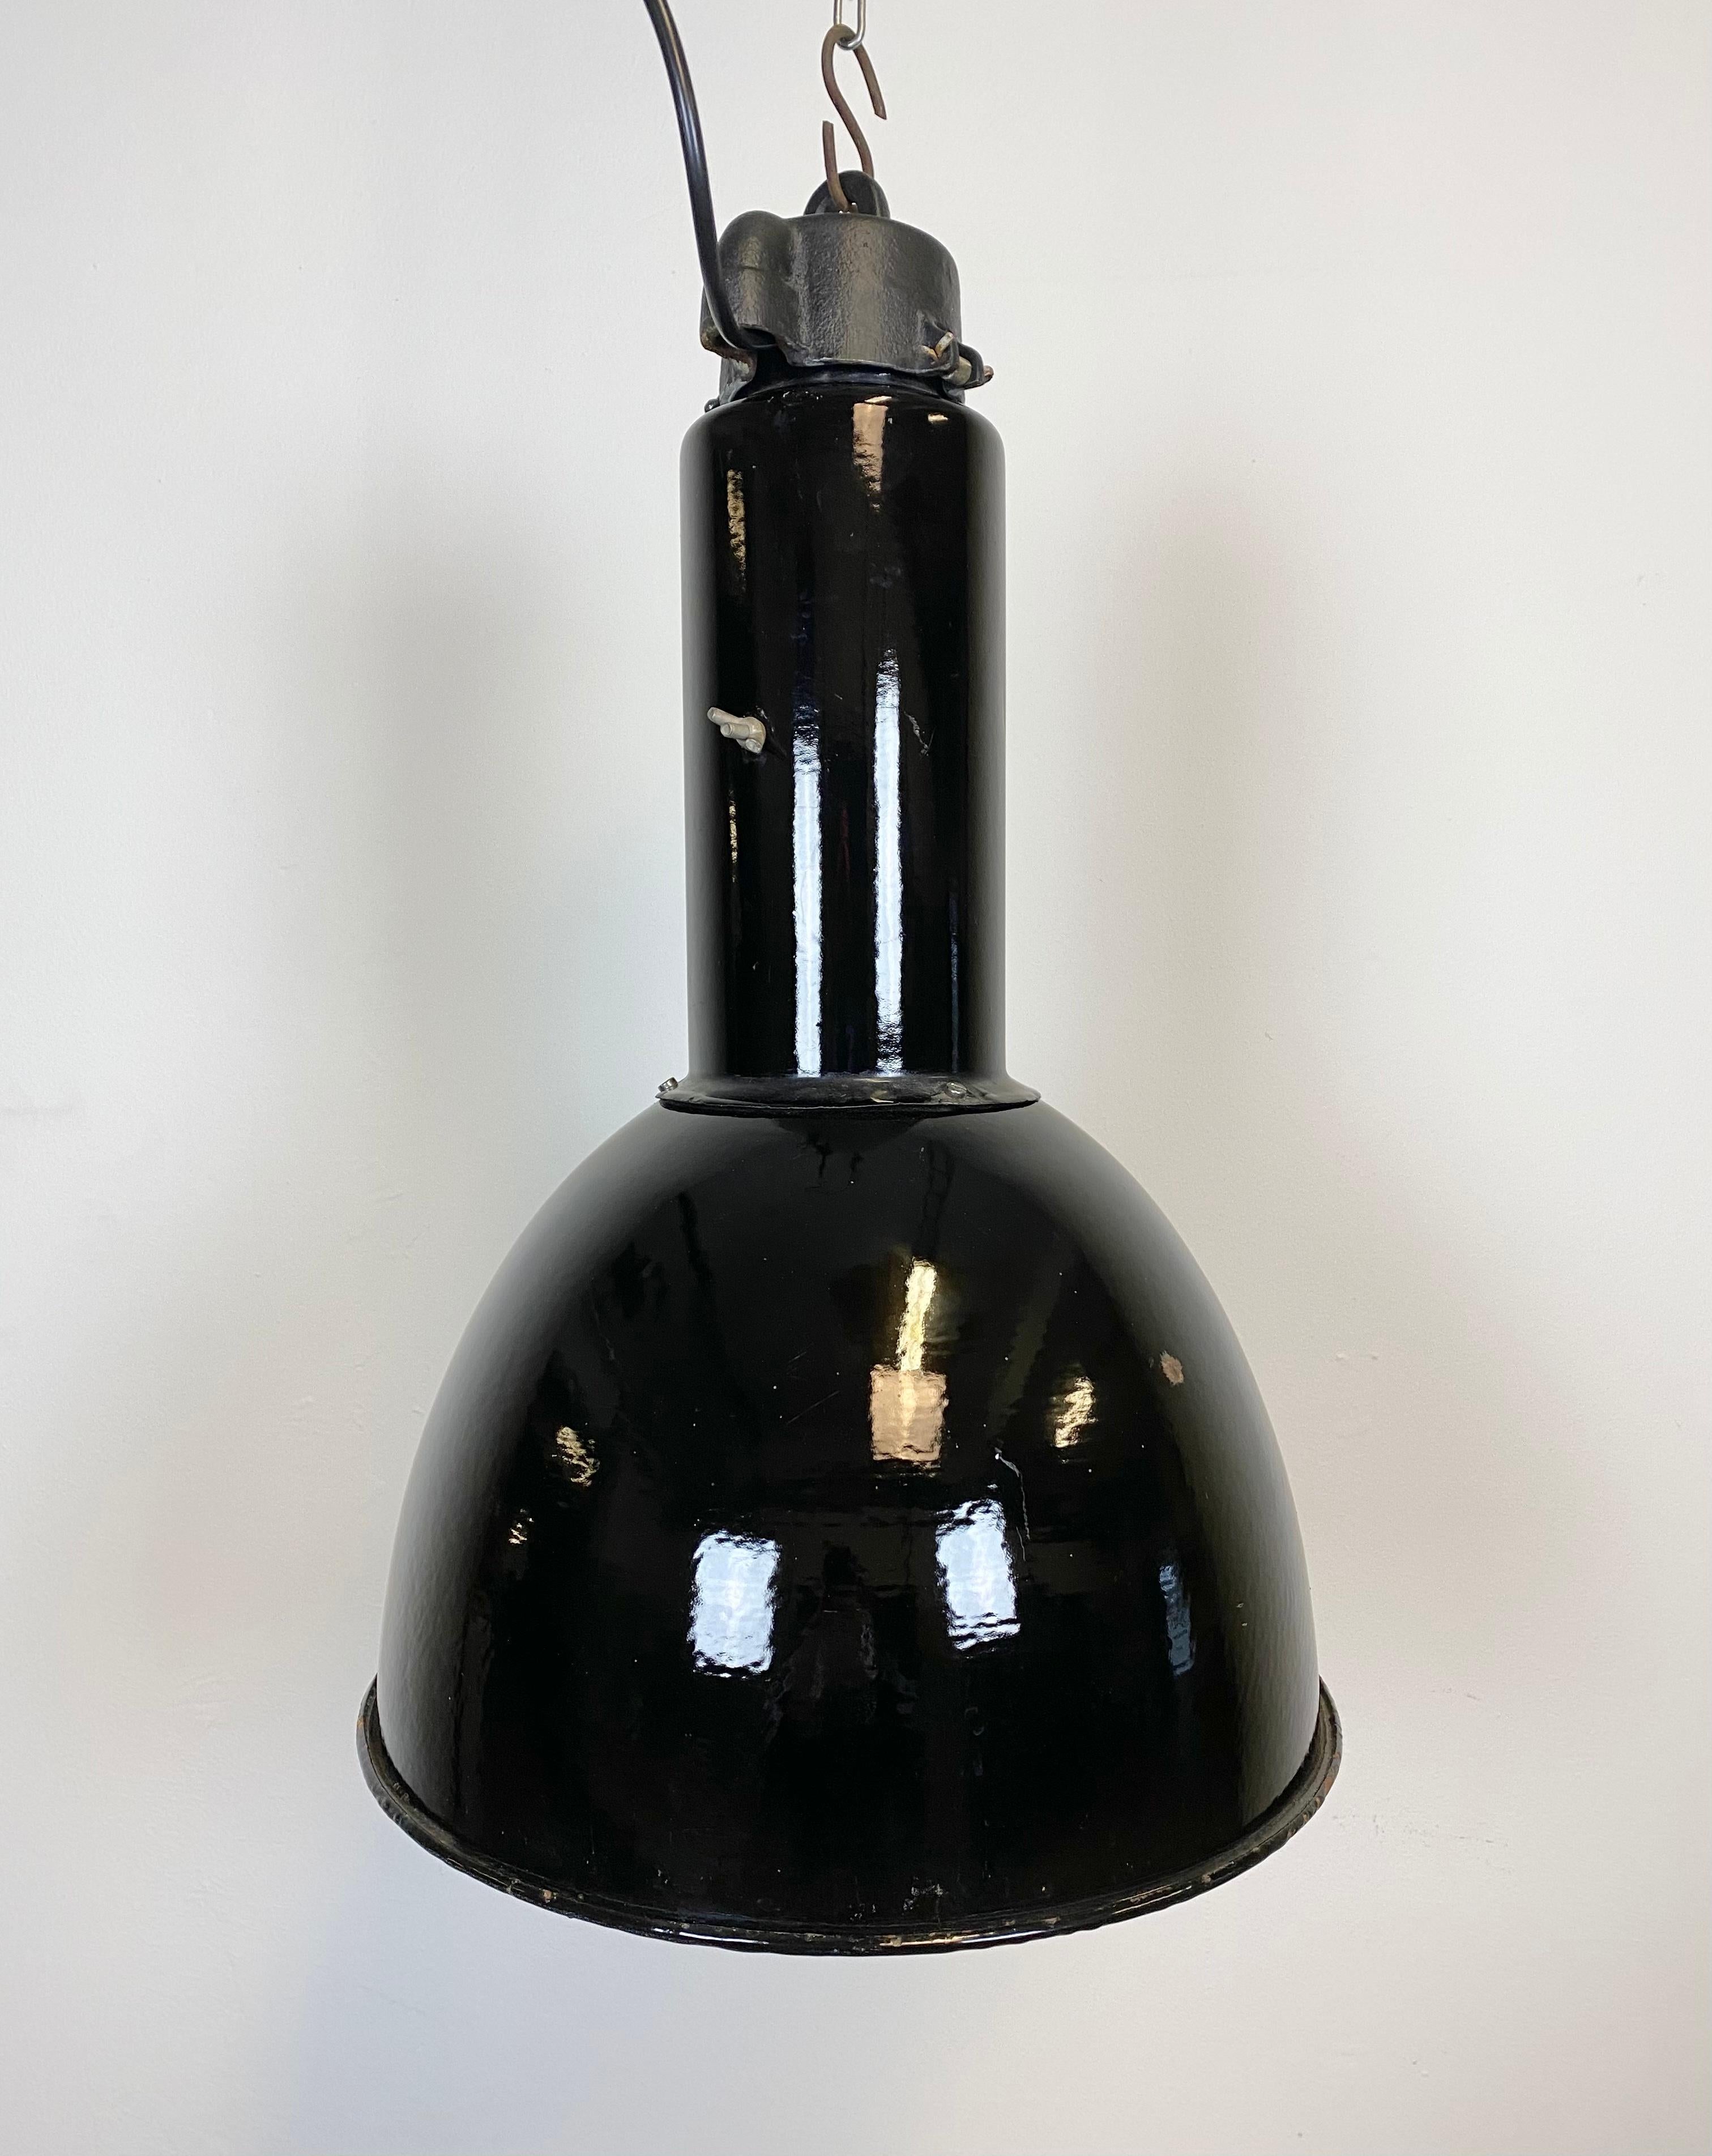 Industrial black enamel pendant lamp made by Elektrosvit in former Czechoslovakia. Designed in the period of Bauhaus. White enamel inside the shade. Cast iron top. New porcelain socket for E 27 lightbulbs and wire. Fully functional. The weight of